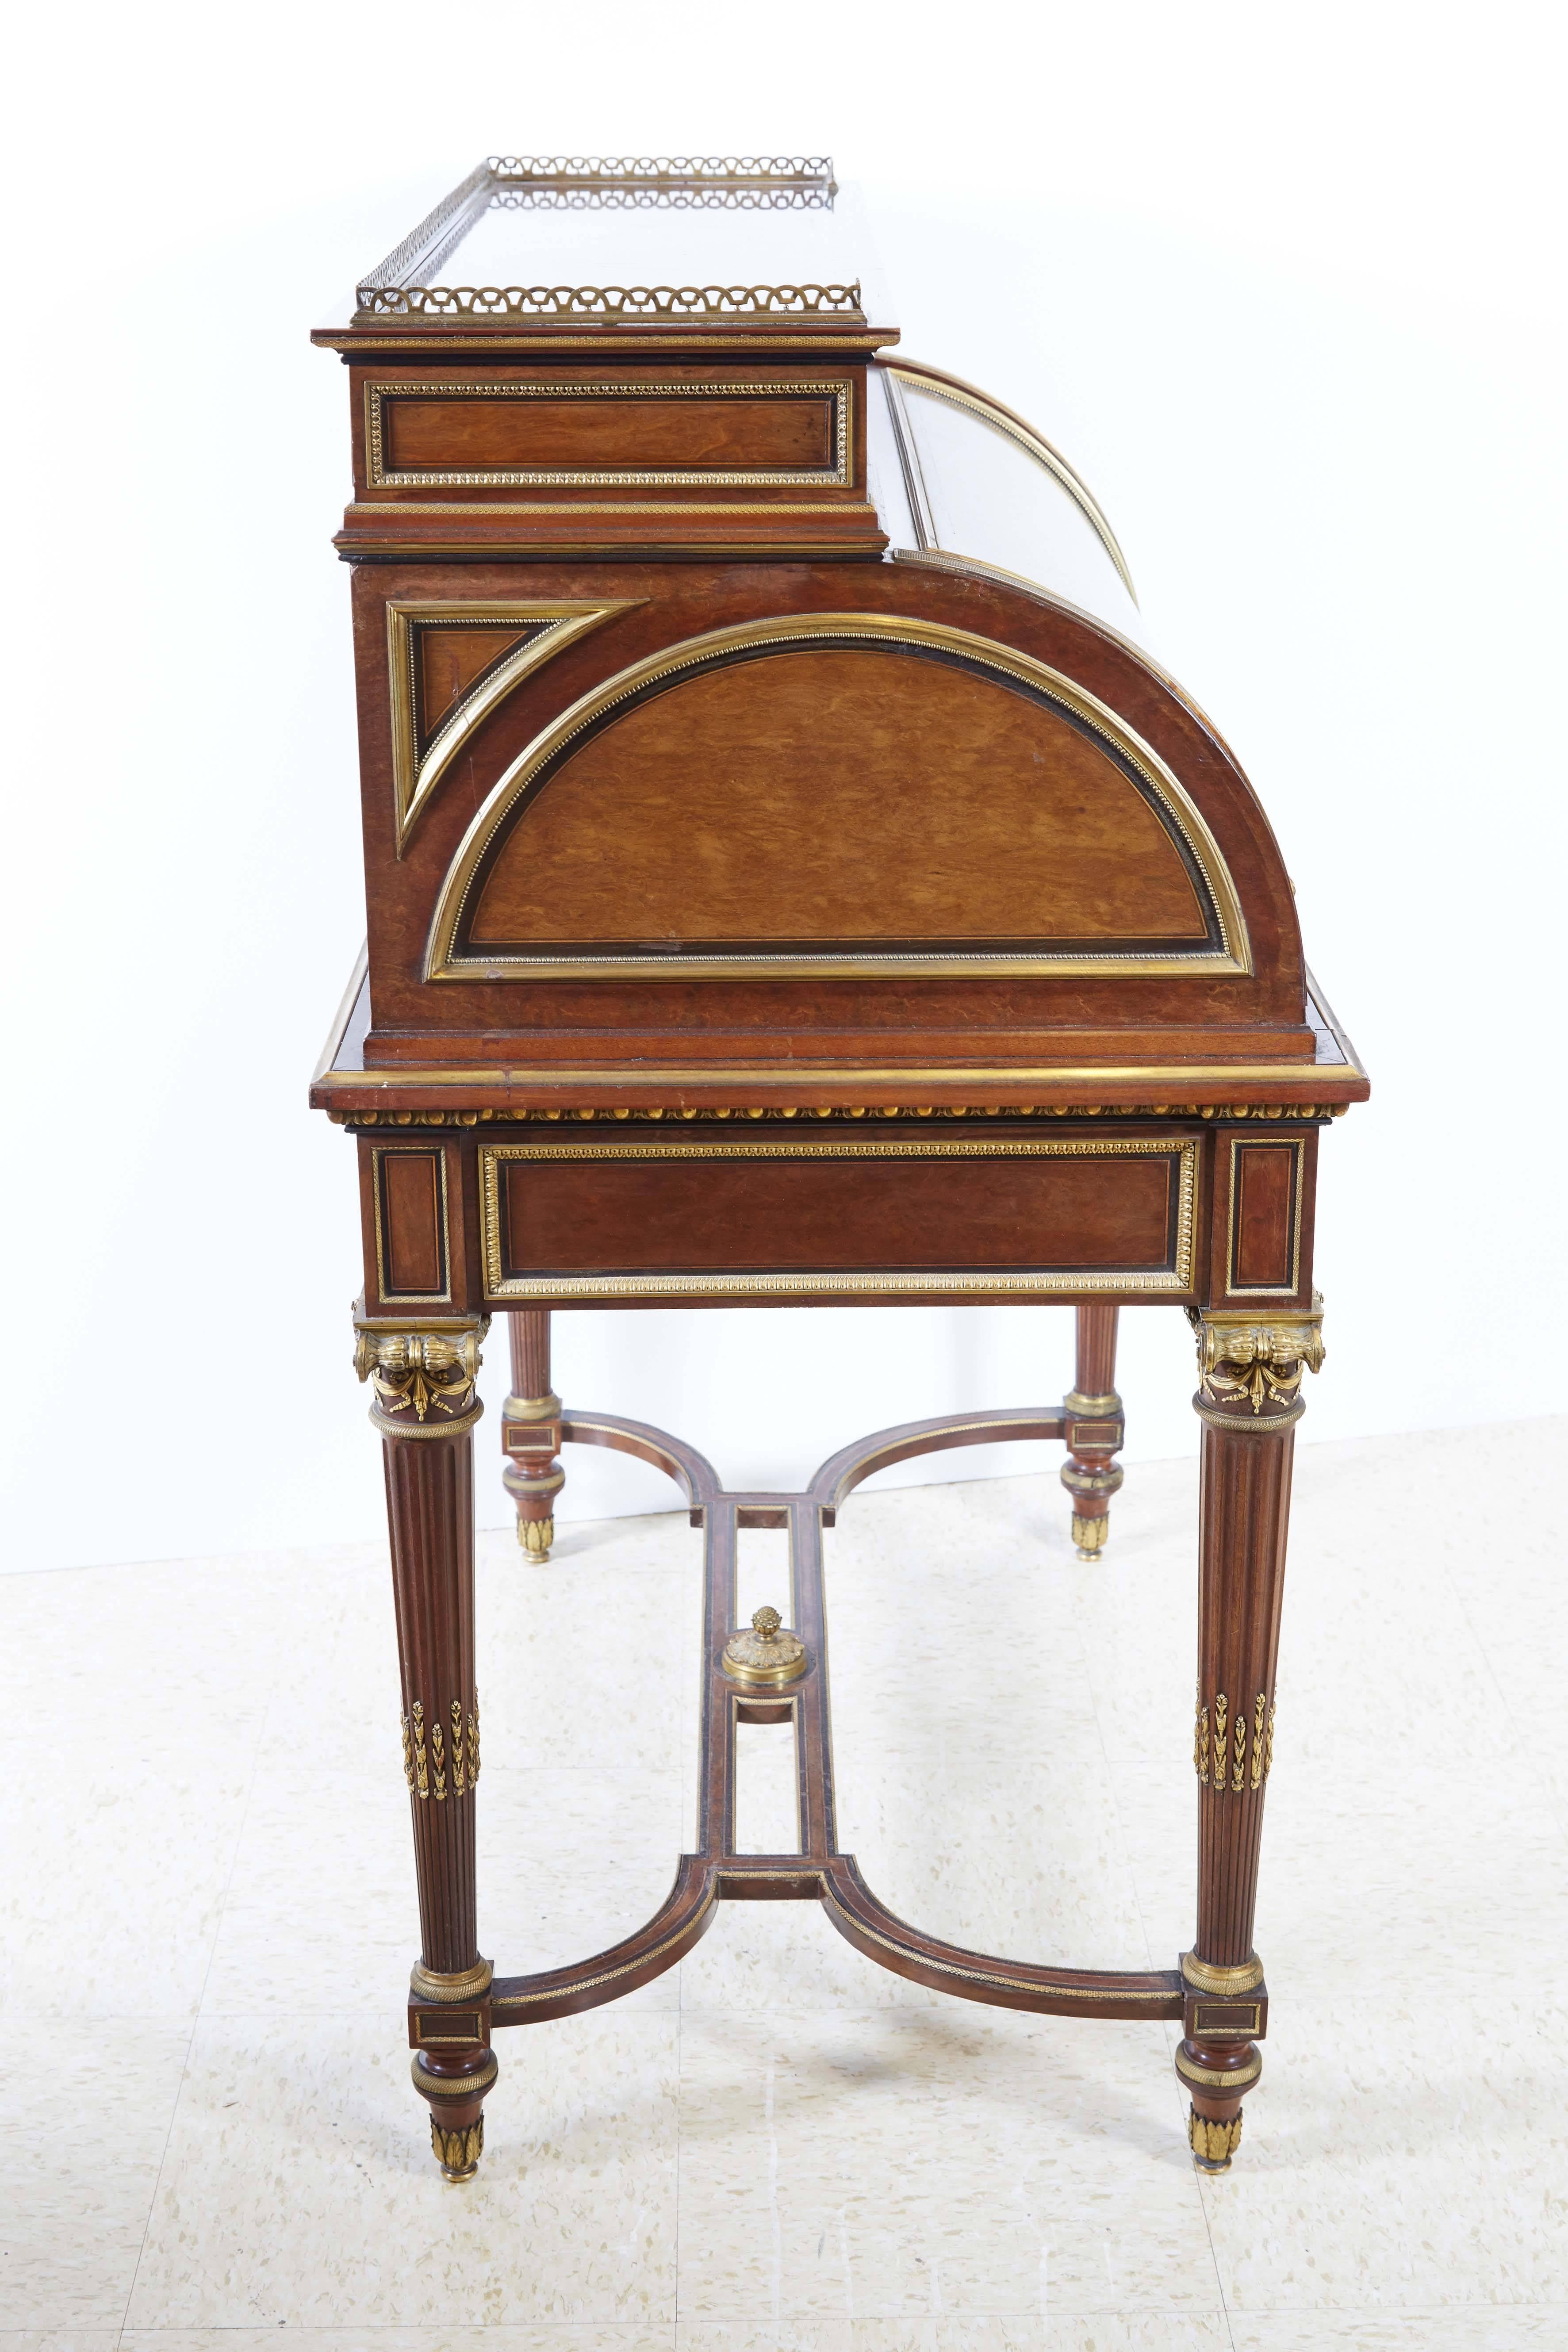 19th Century French Ormolu-Mounted Bureau a Cylindre Roll Top Desk Signed H. Fourdinois